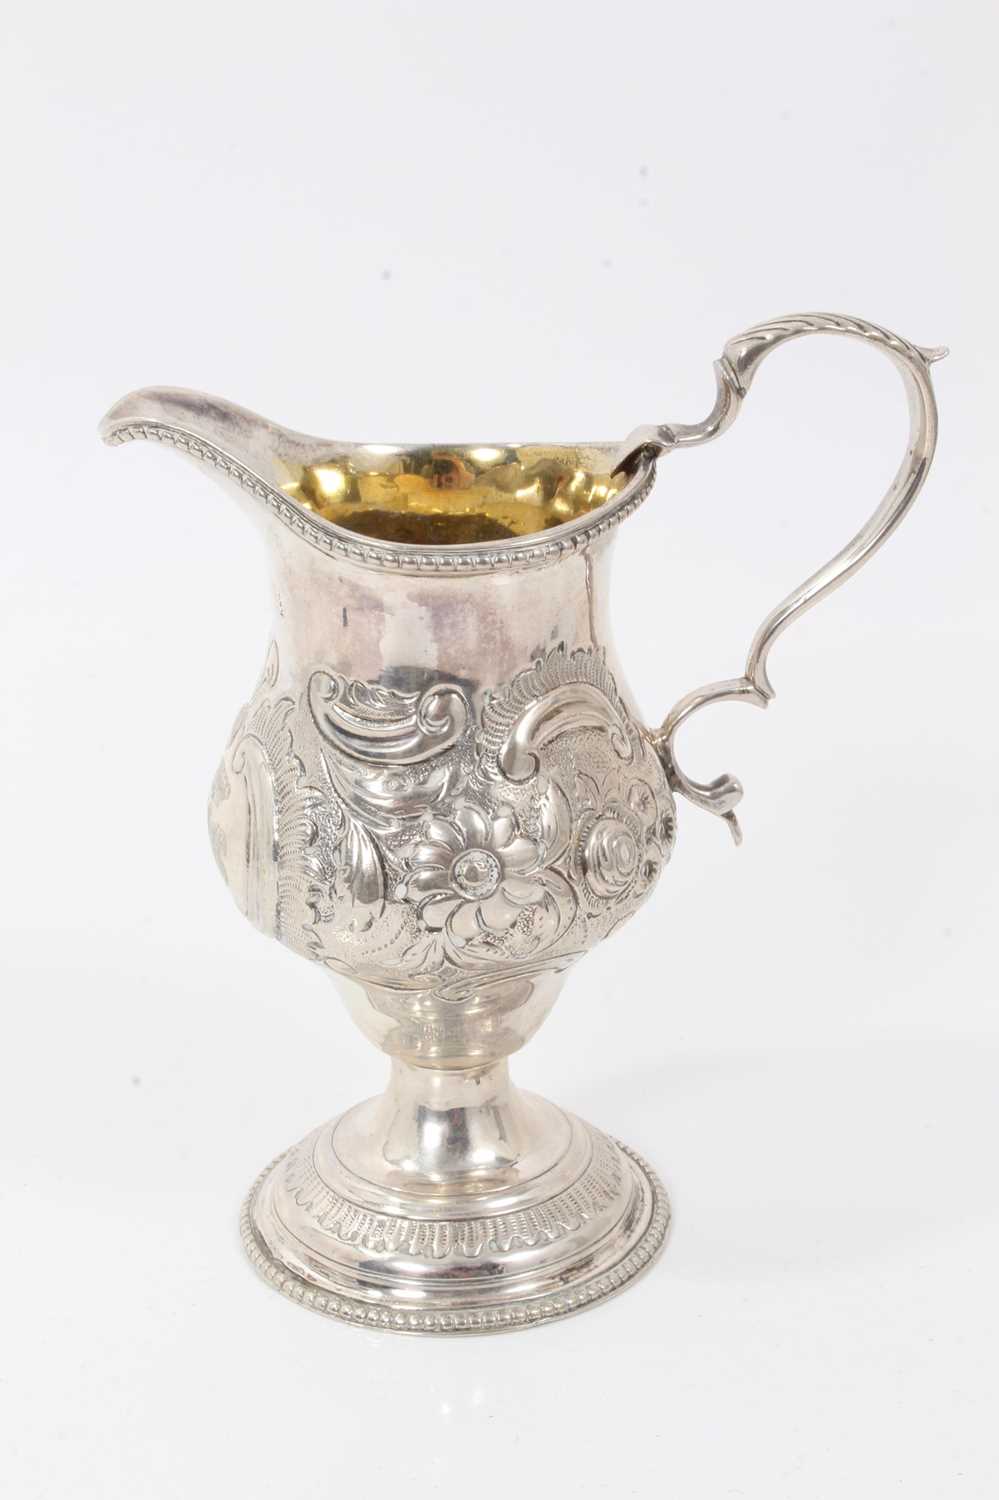 George III silver cream jug with engraved coronet and monogram - Image 2 of 6